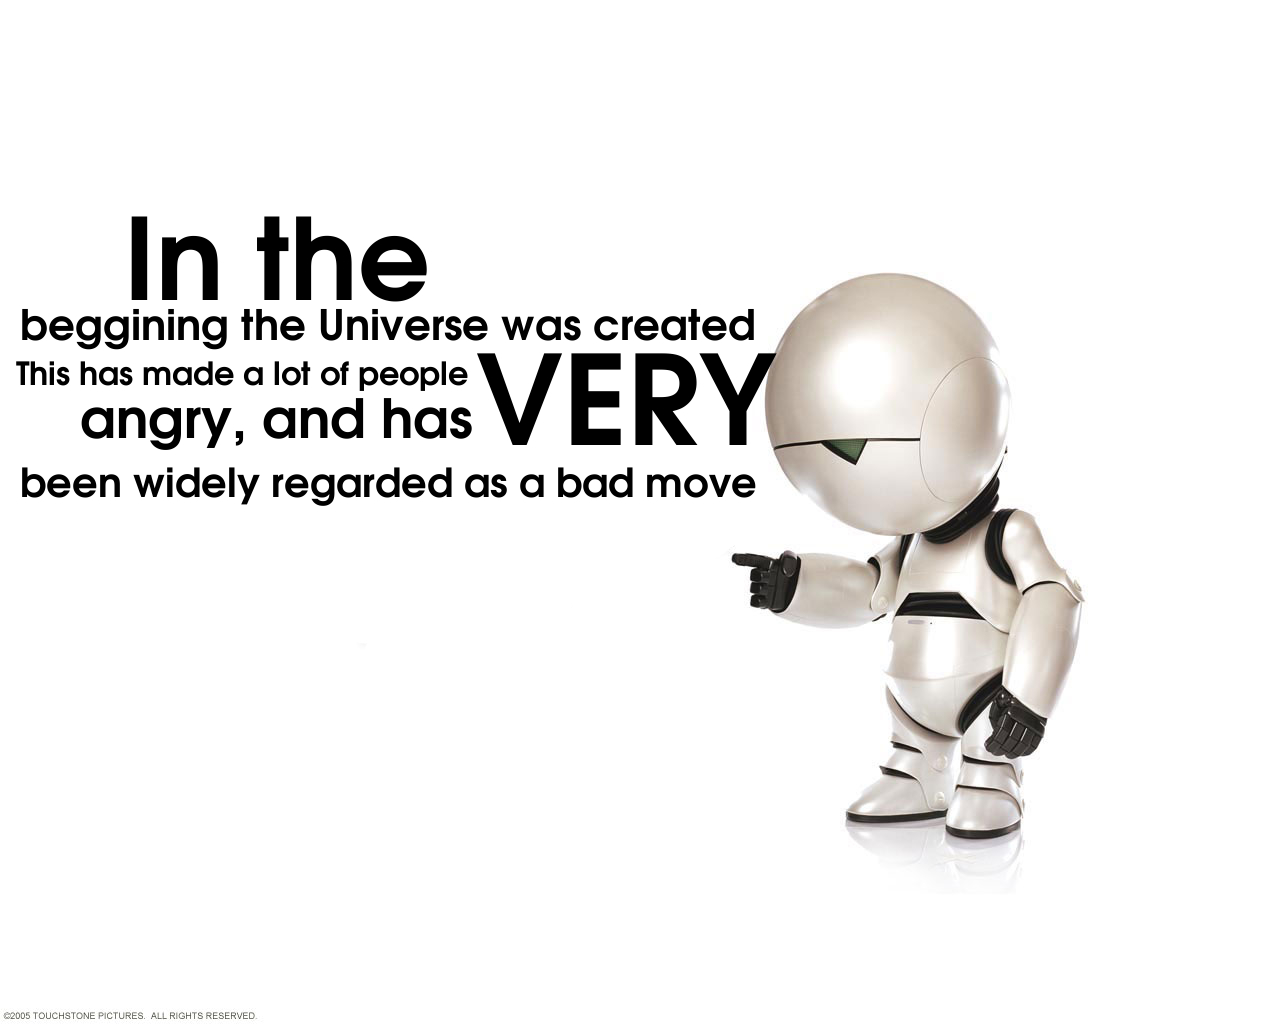 Hitchhikers Guide To The Galaxy Quotes. QuotesGram